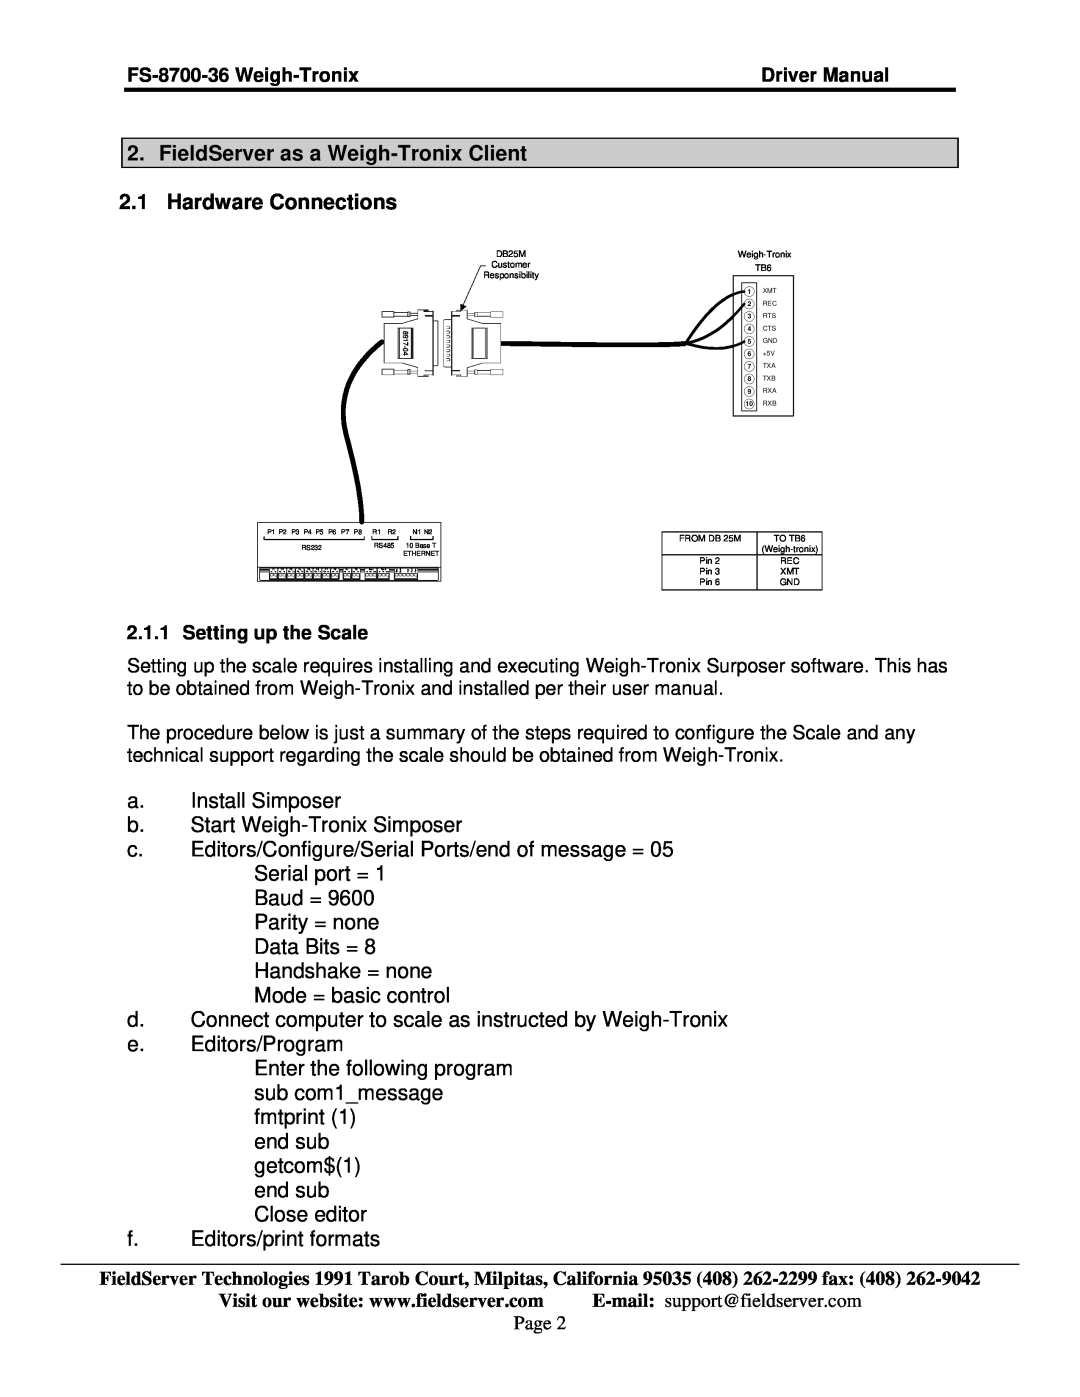 FieldServer FS-8700-36 instruction manual FieldServer as a Weigh-Tronix Client 2.1 Hardware Connections 